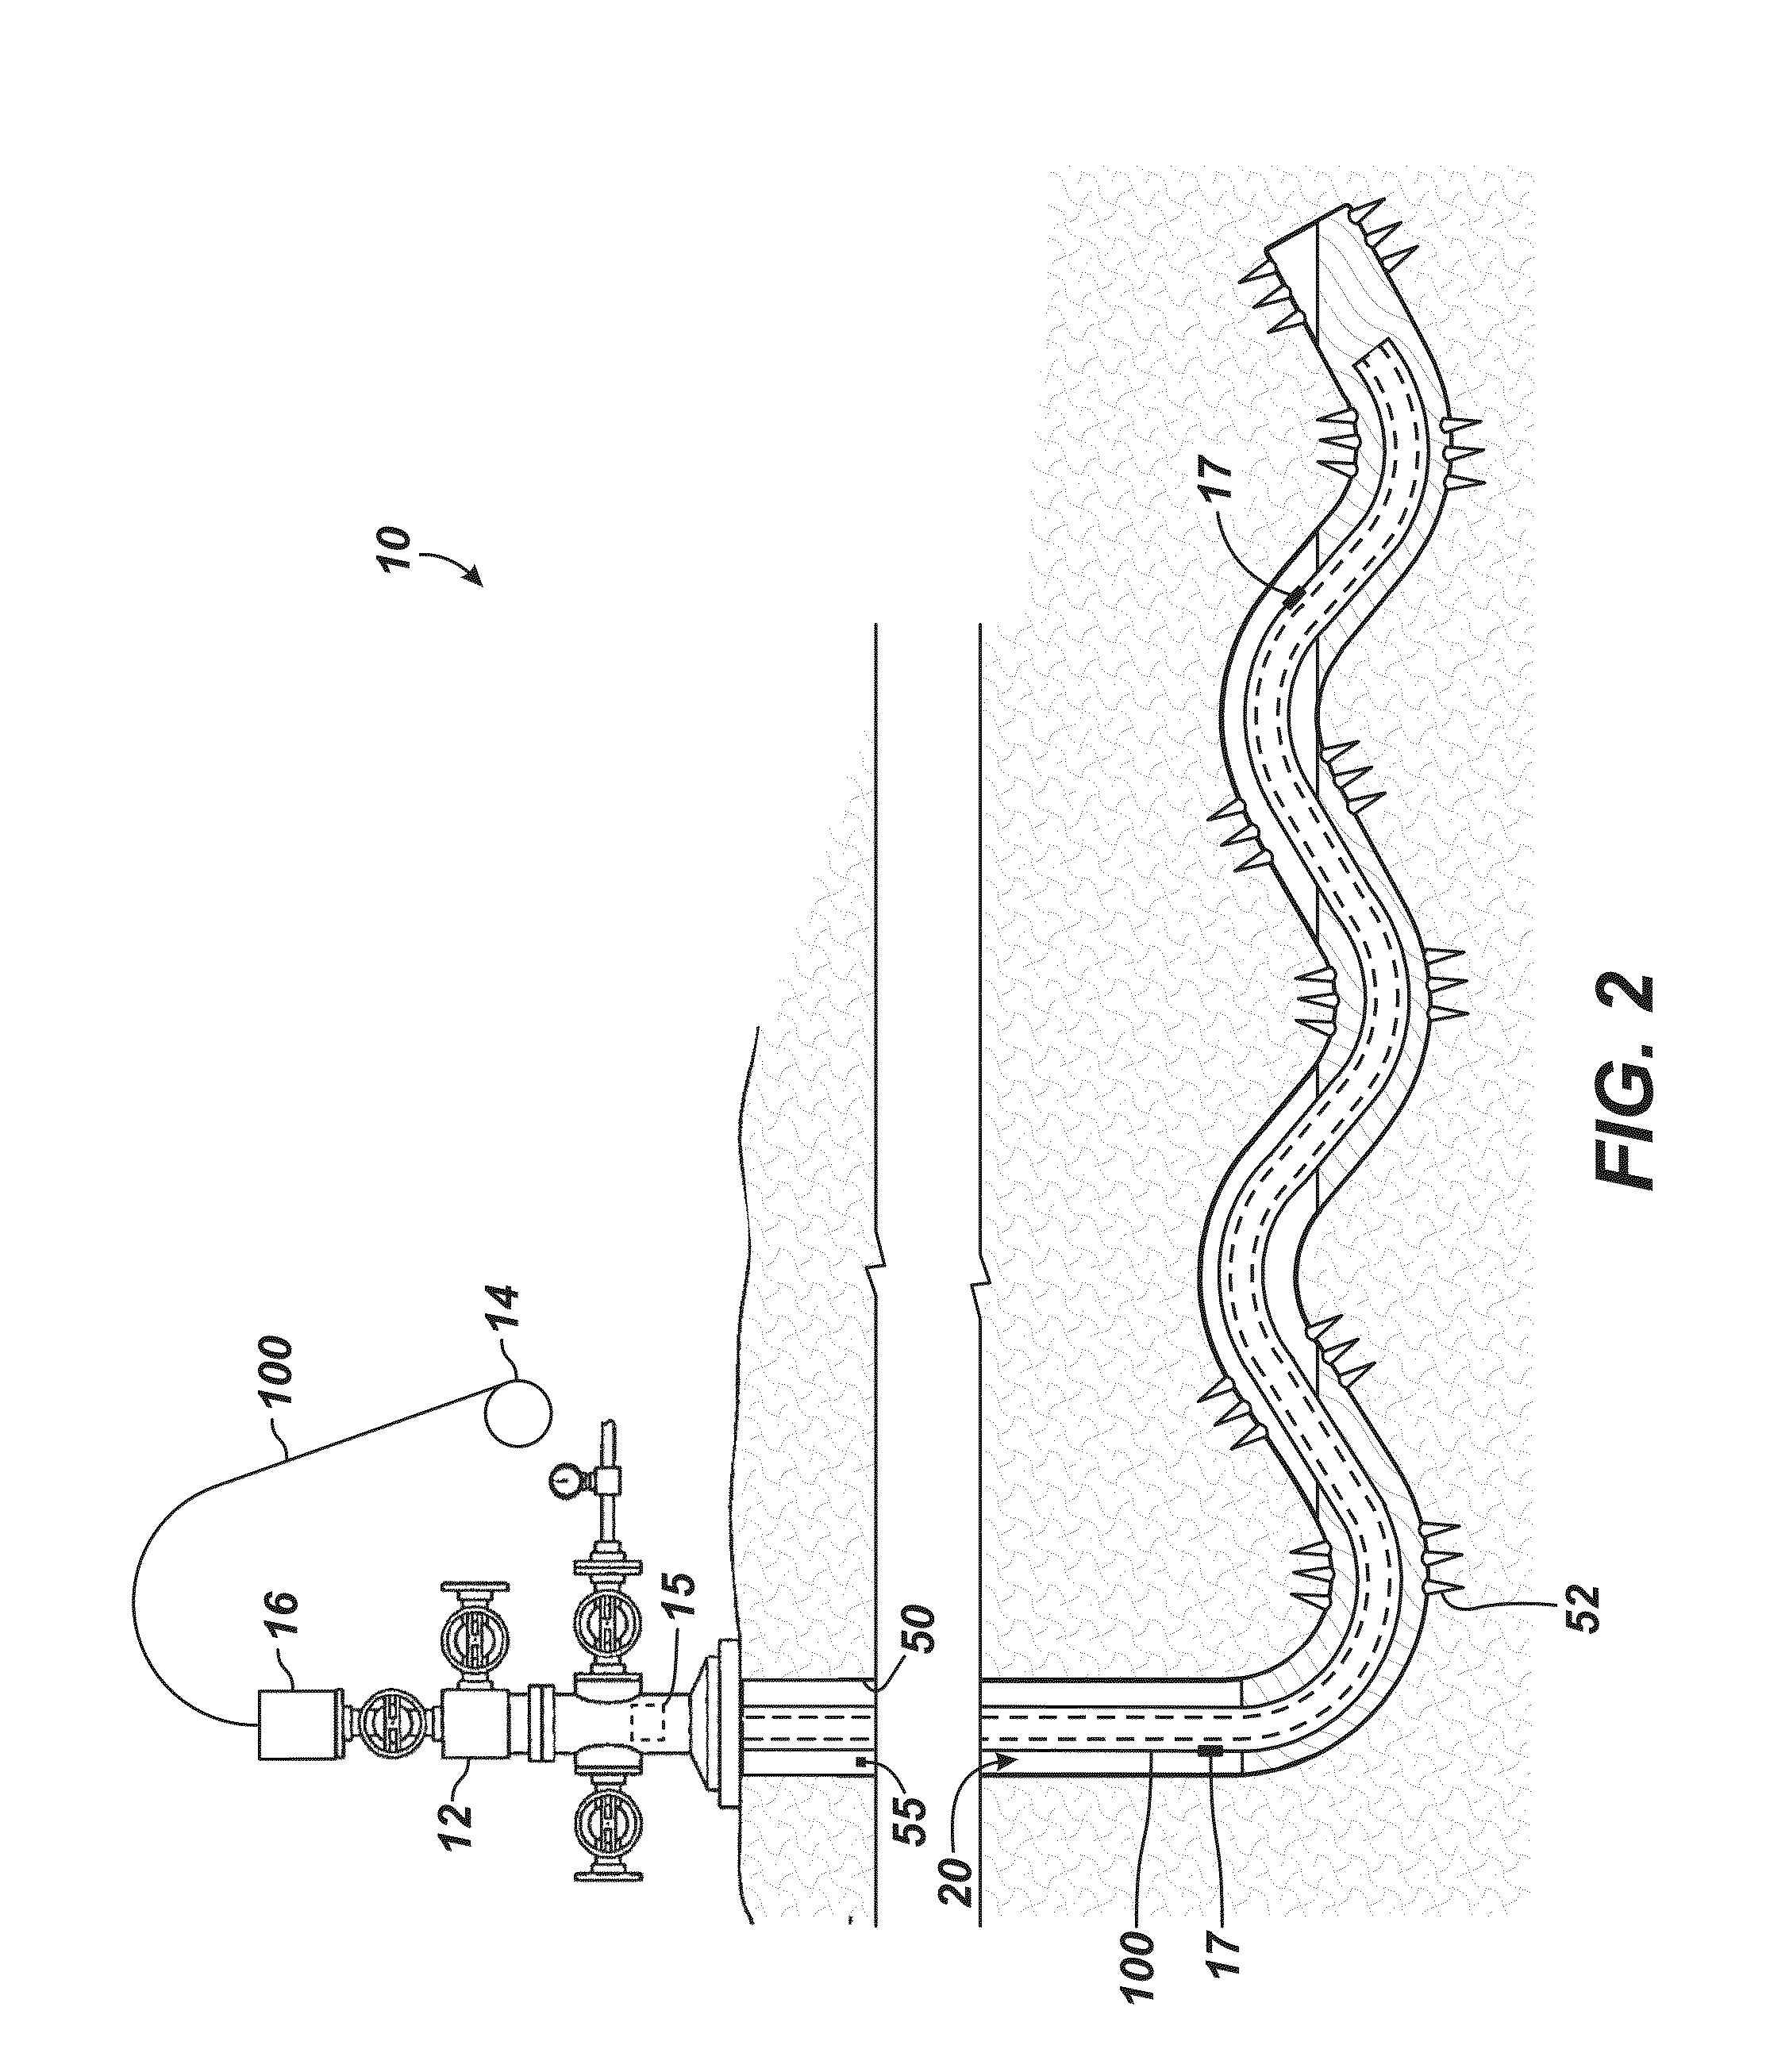 Gas Lift System Having Expandable Velocity String